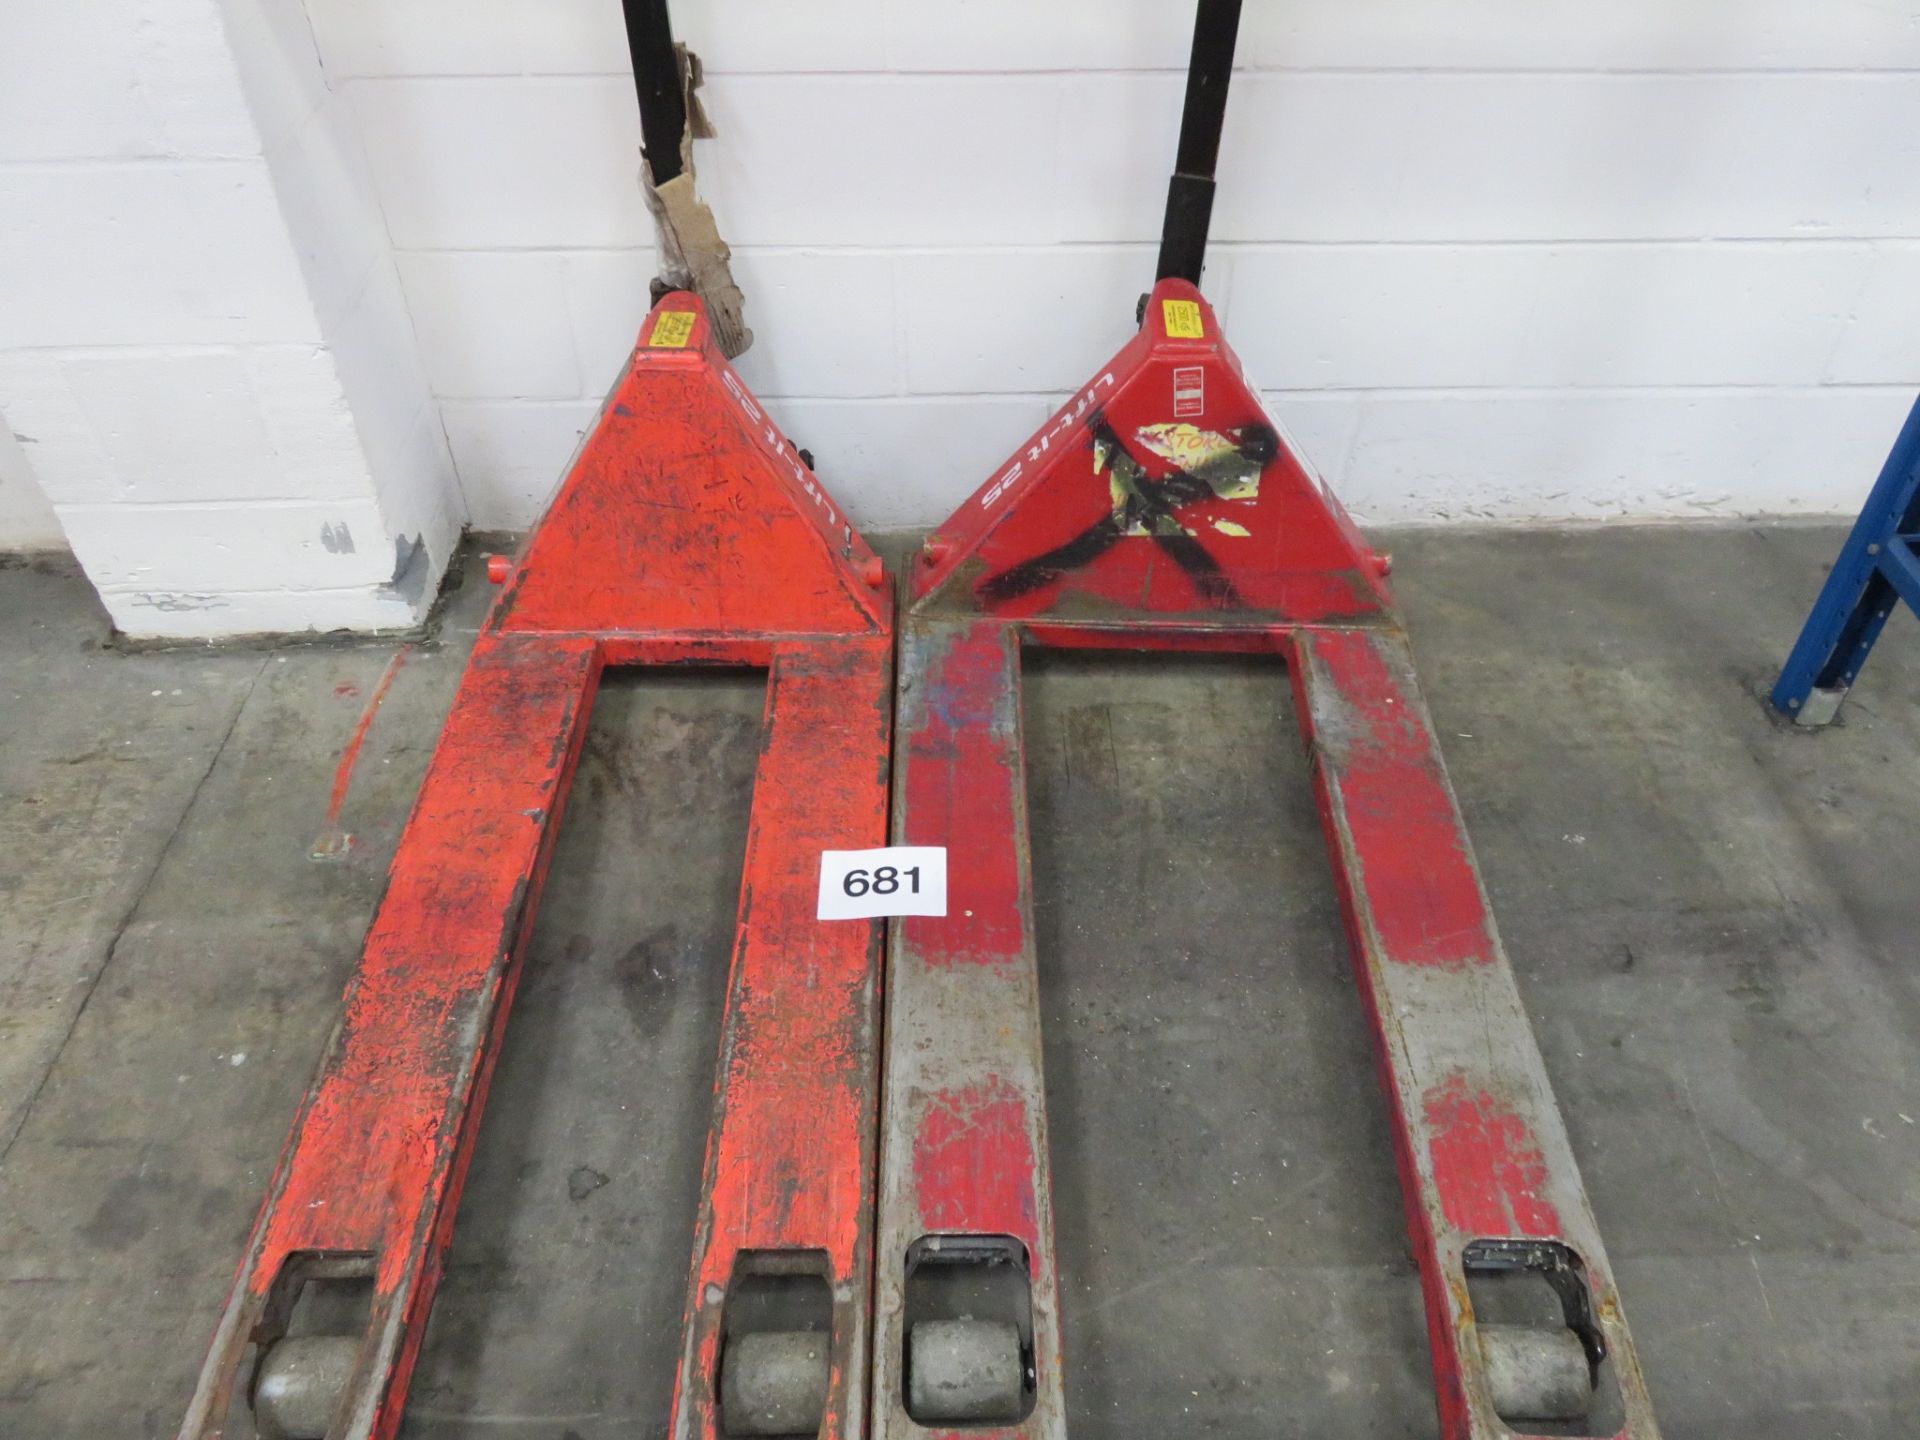 2 x Pallet Trucks. Lift out charge £10